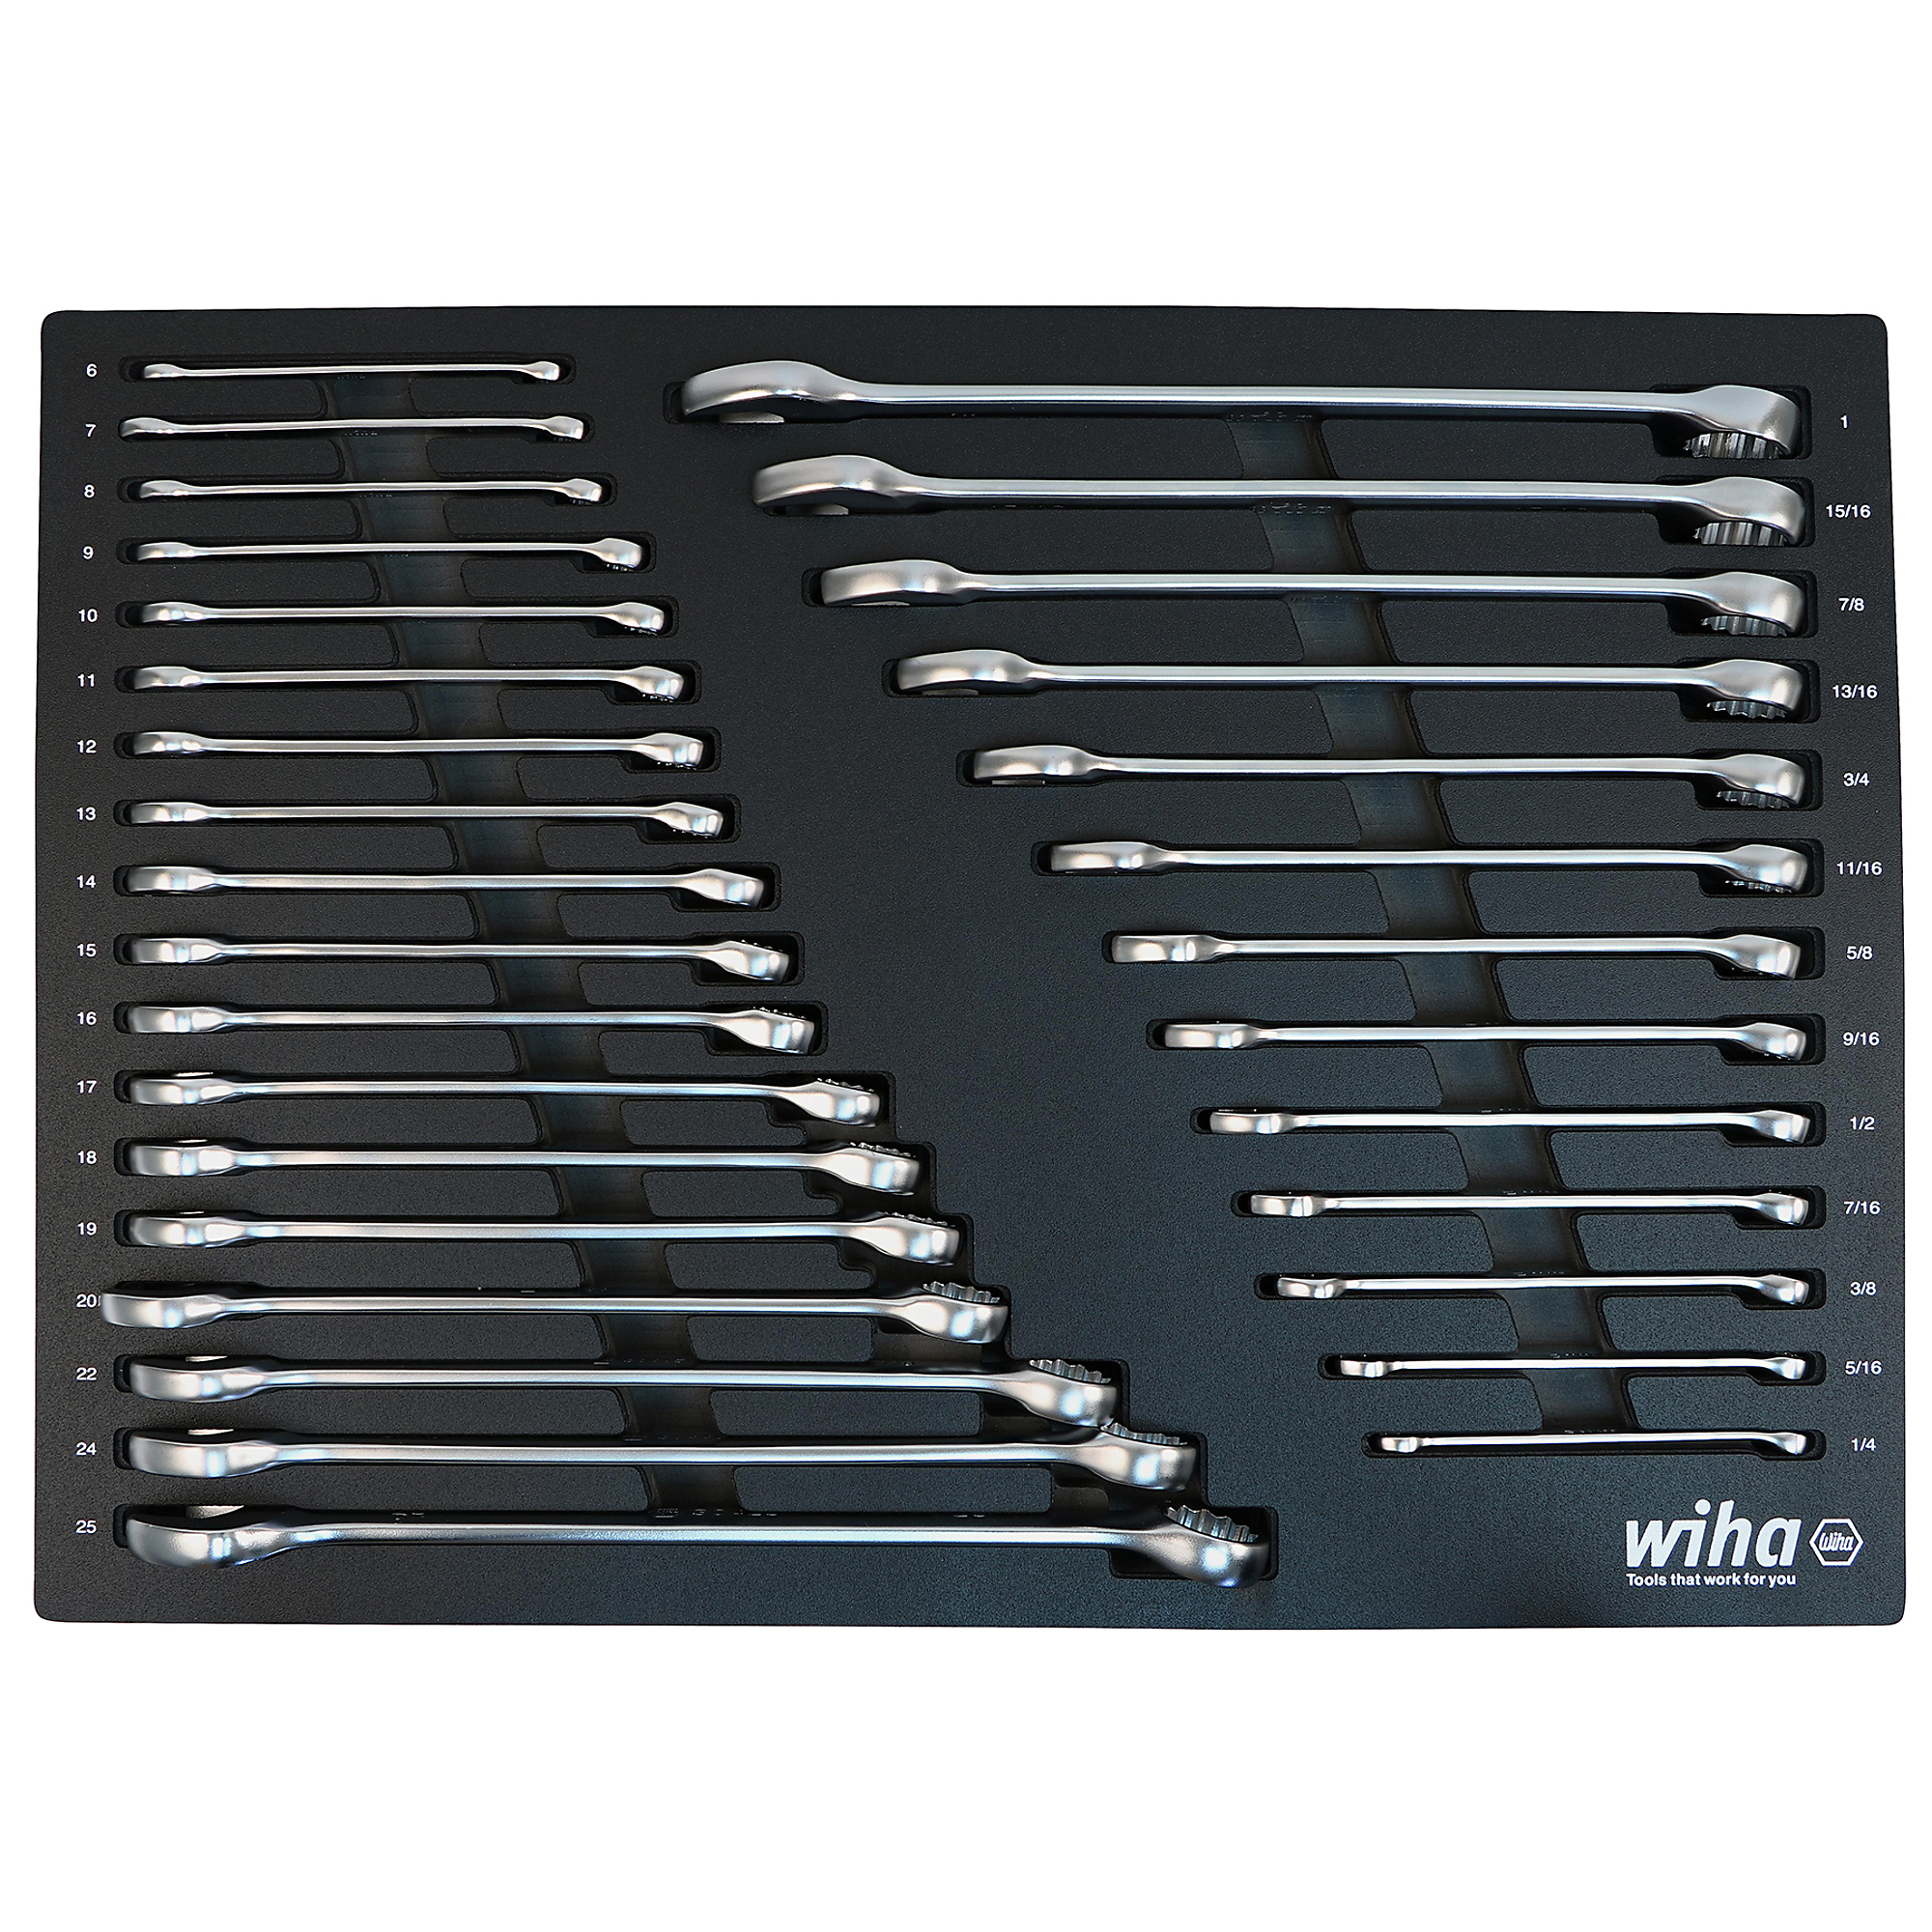 Wiha, 31PC Combination Wrench Tray Set - SAE Metric, Pieces (qty.) 32, Measurement Standard Standard (SAE)/Metric, Model 30492